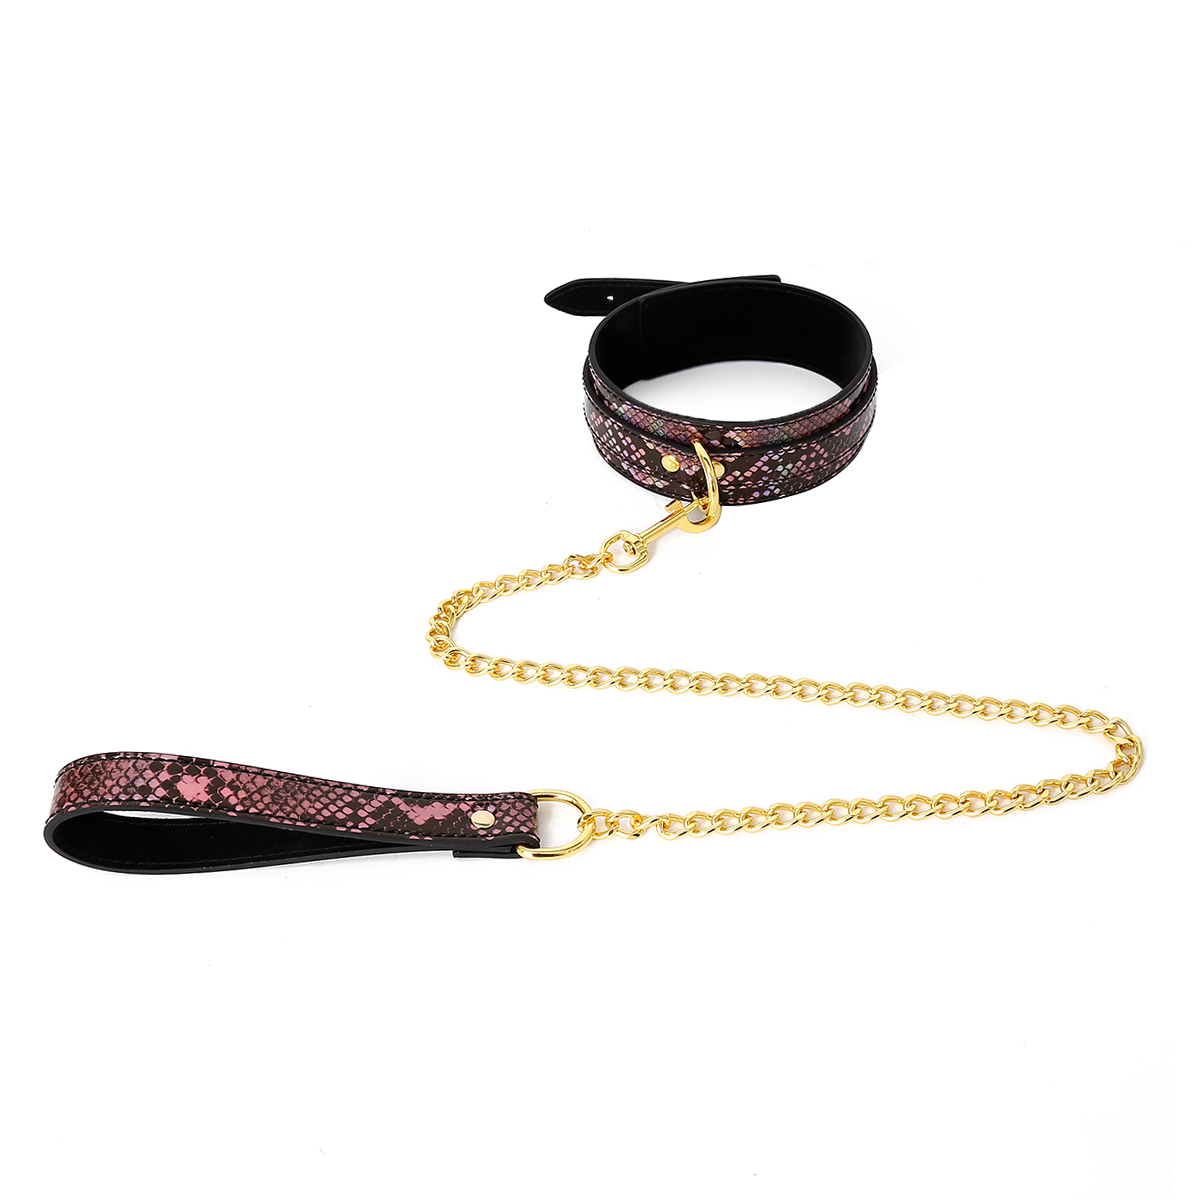 Collar-GoldPink-Reptile-with-Leash-OPR-321128-2